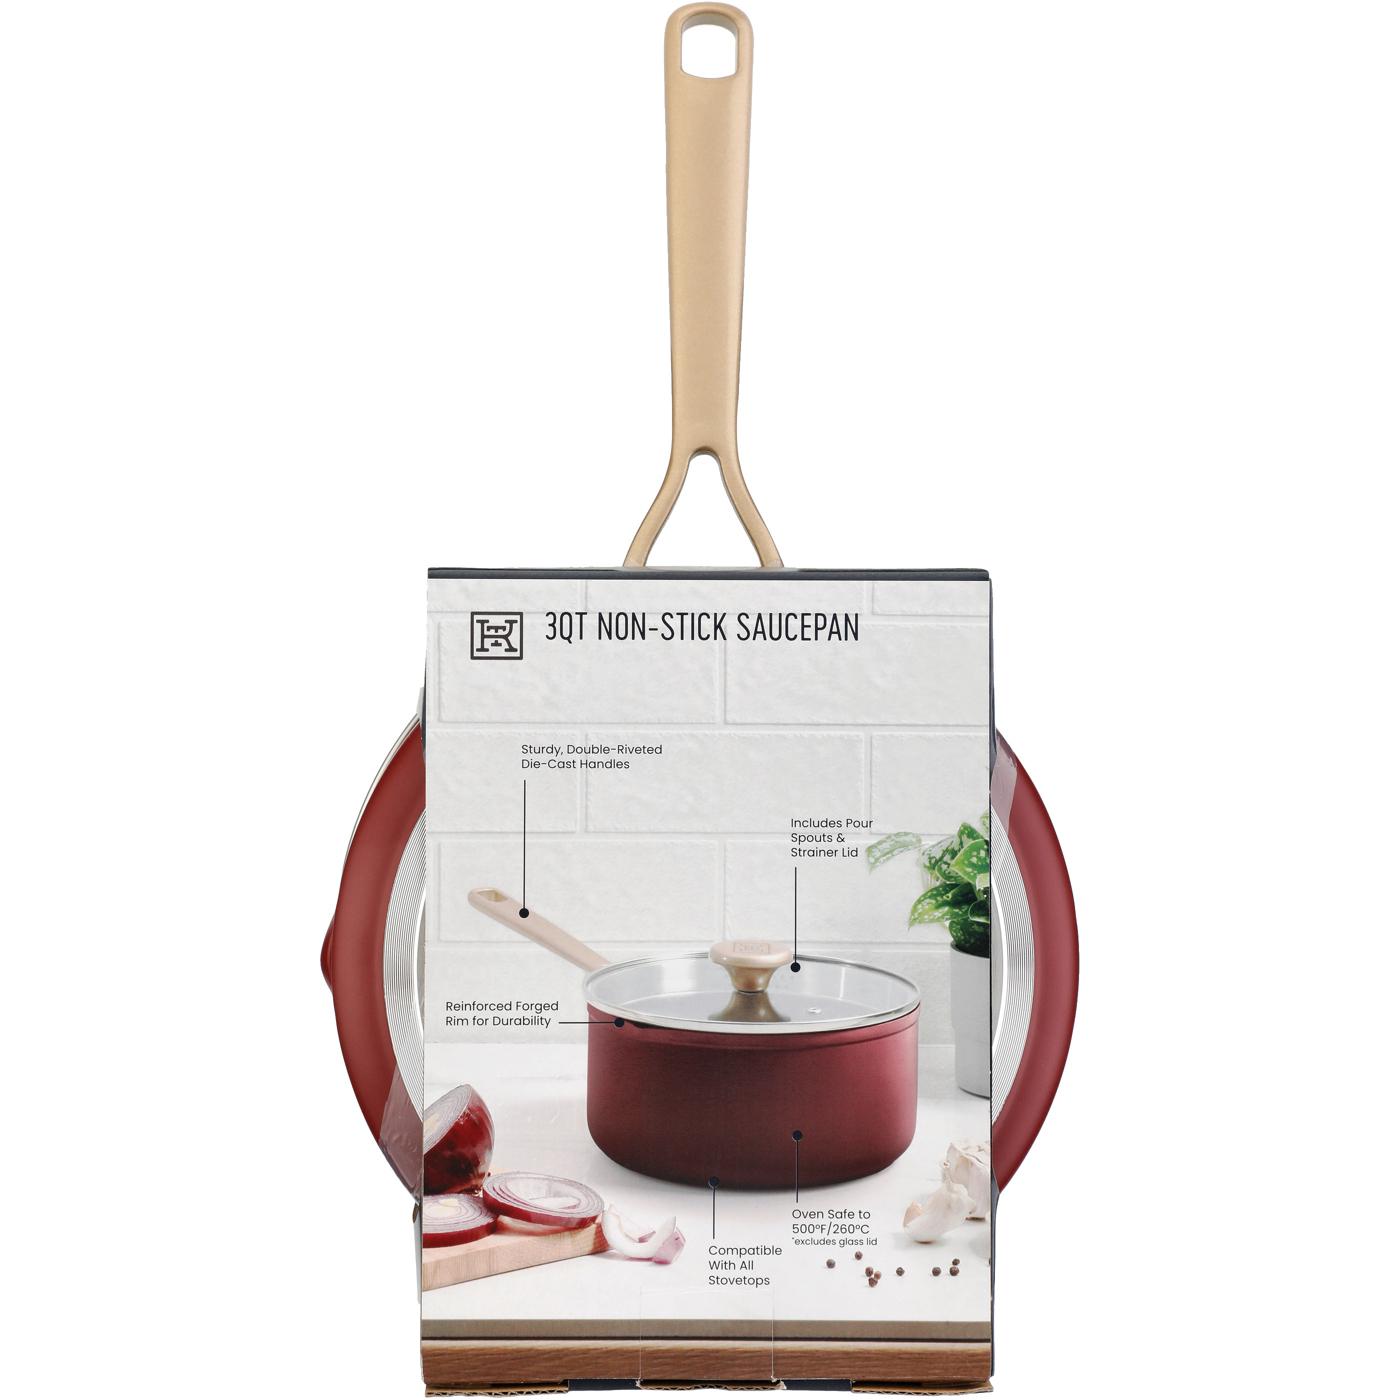 Kitchen & Table by H-E-B Non-Stick Saucepan - Bordeaux Red; image 2 of 7